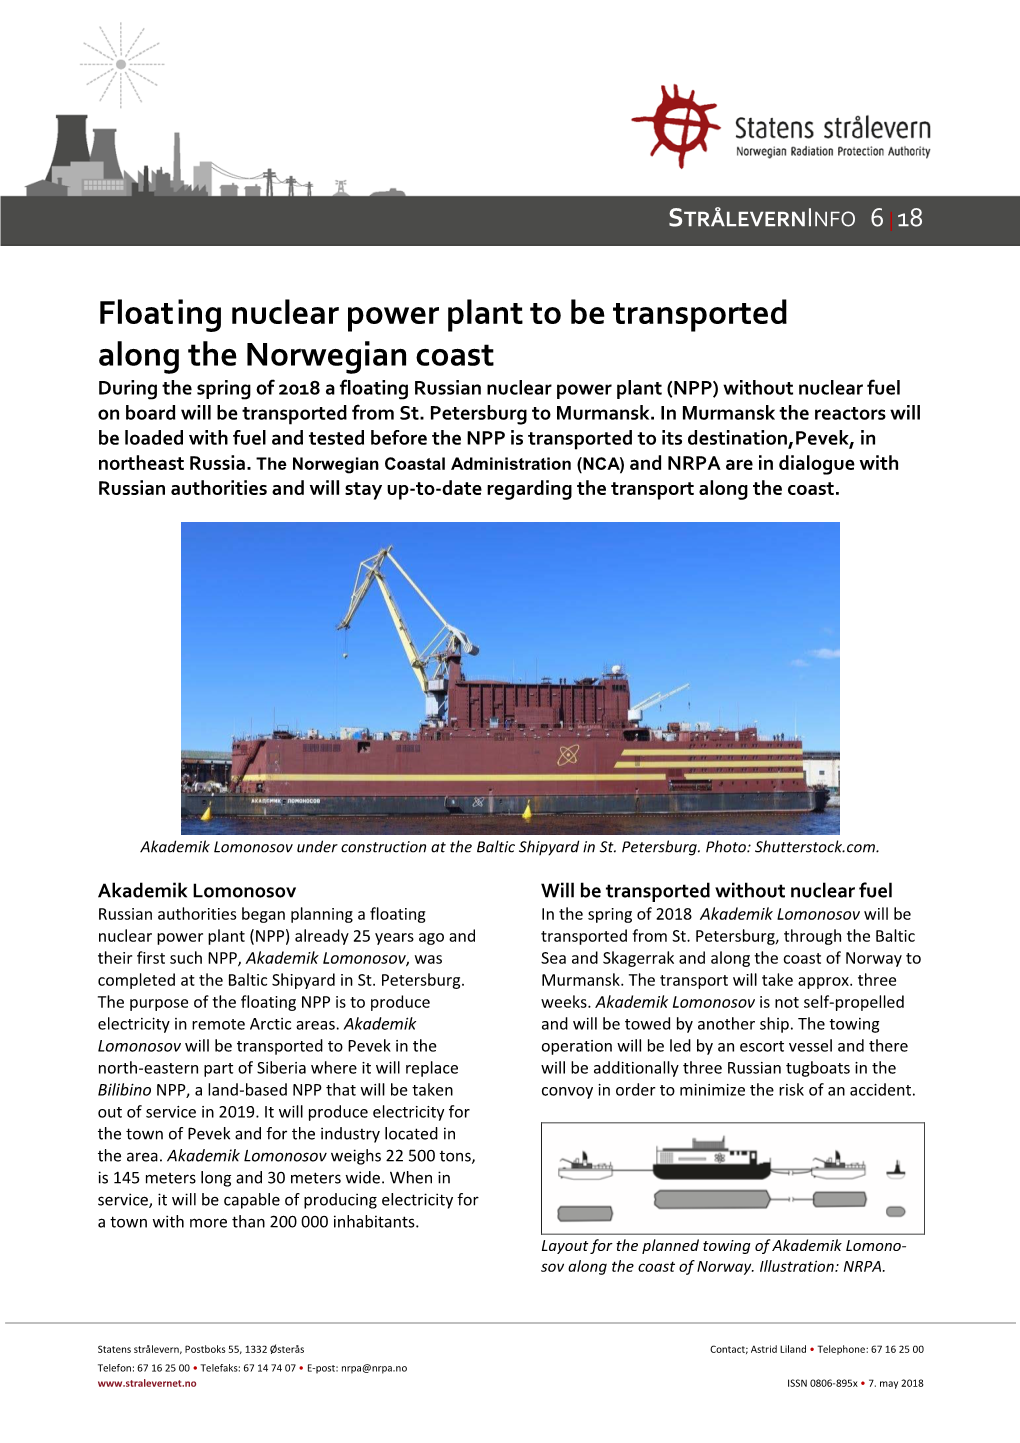 Floating Nuclear Power Plant to Be Transported Along the Norwegian